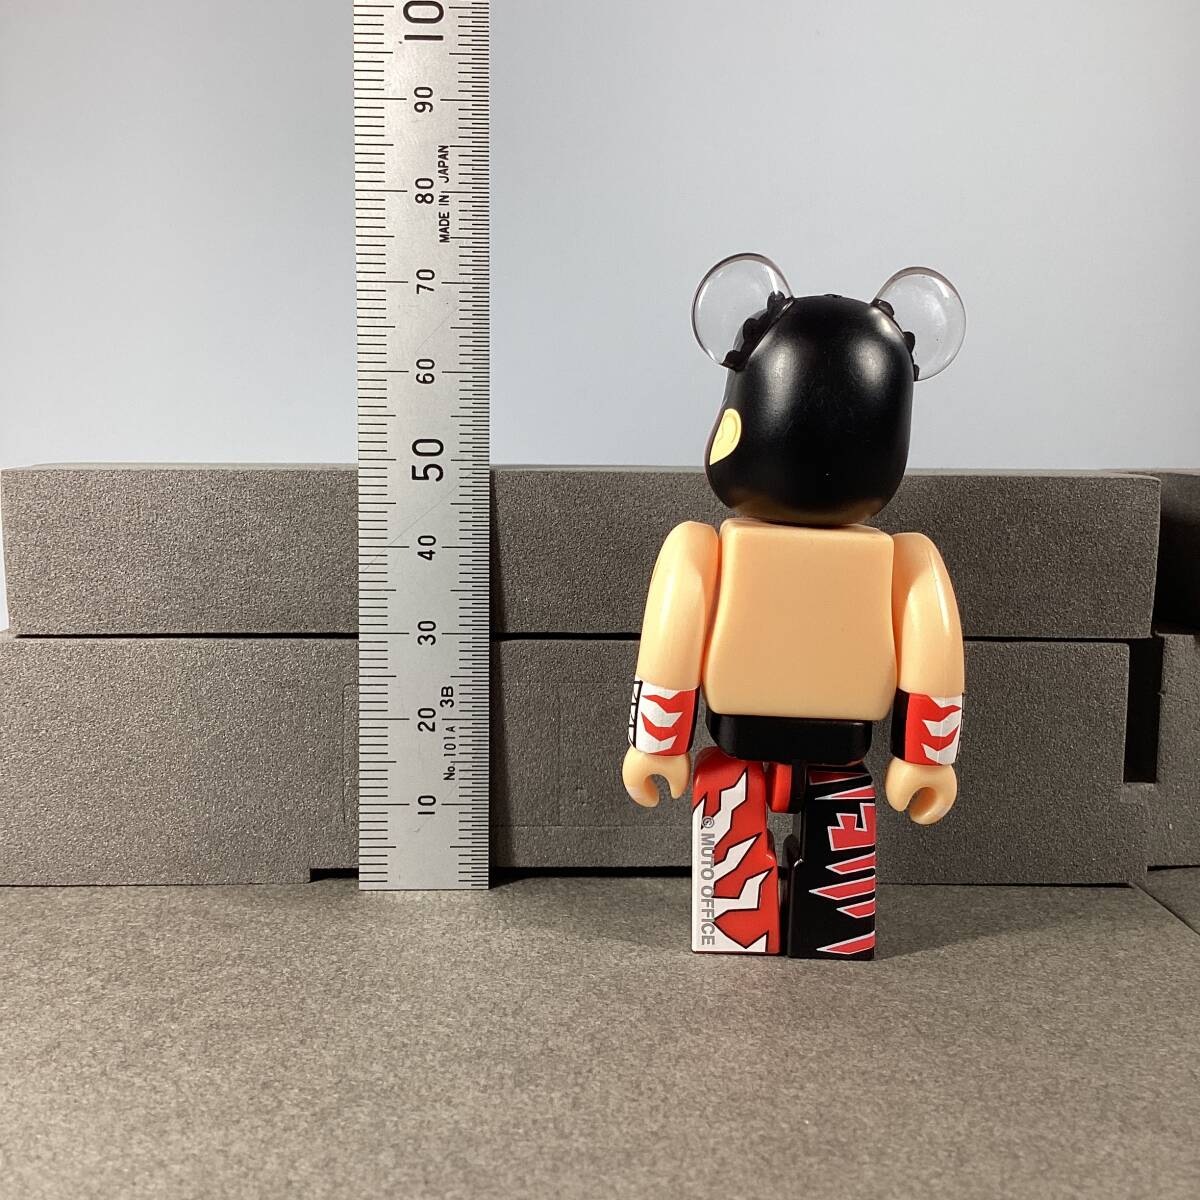 [ used ] Bearbrick 100% artist reverse side (. 0 .. many ) BE@R BRICK [ postage exhibitior charge ]